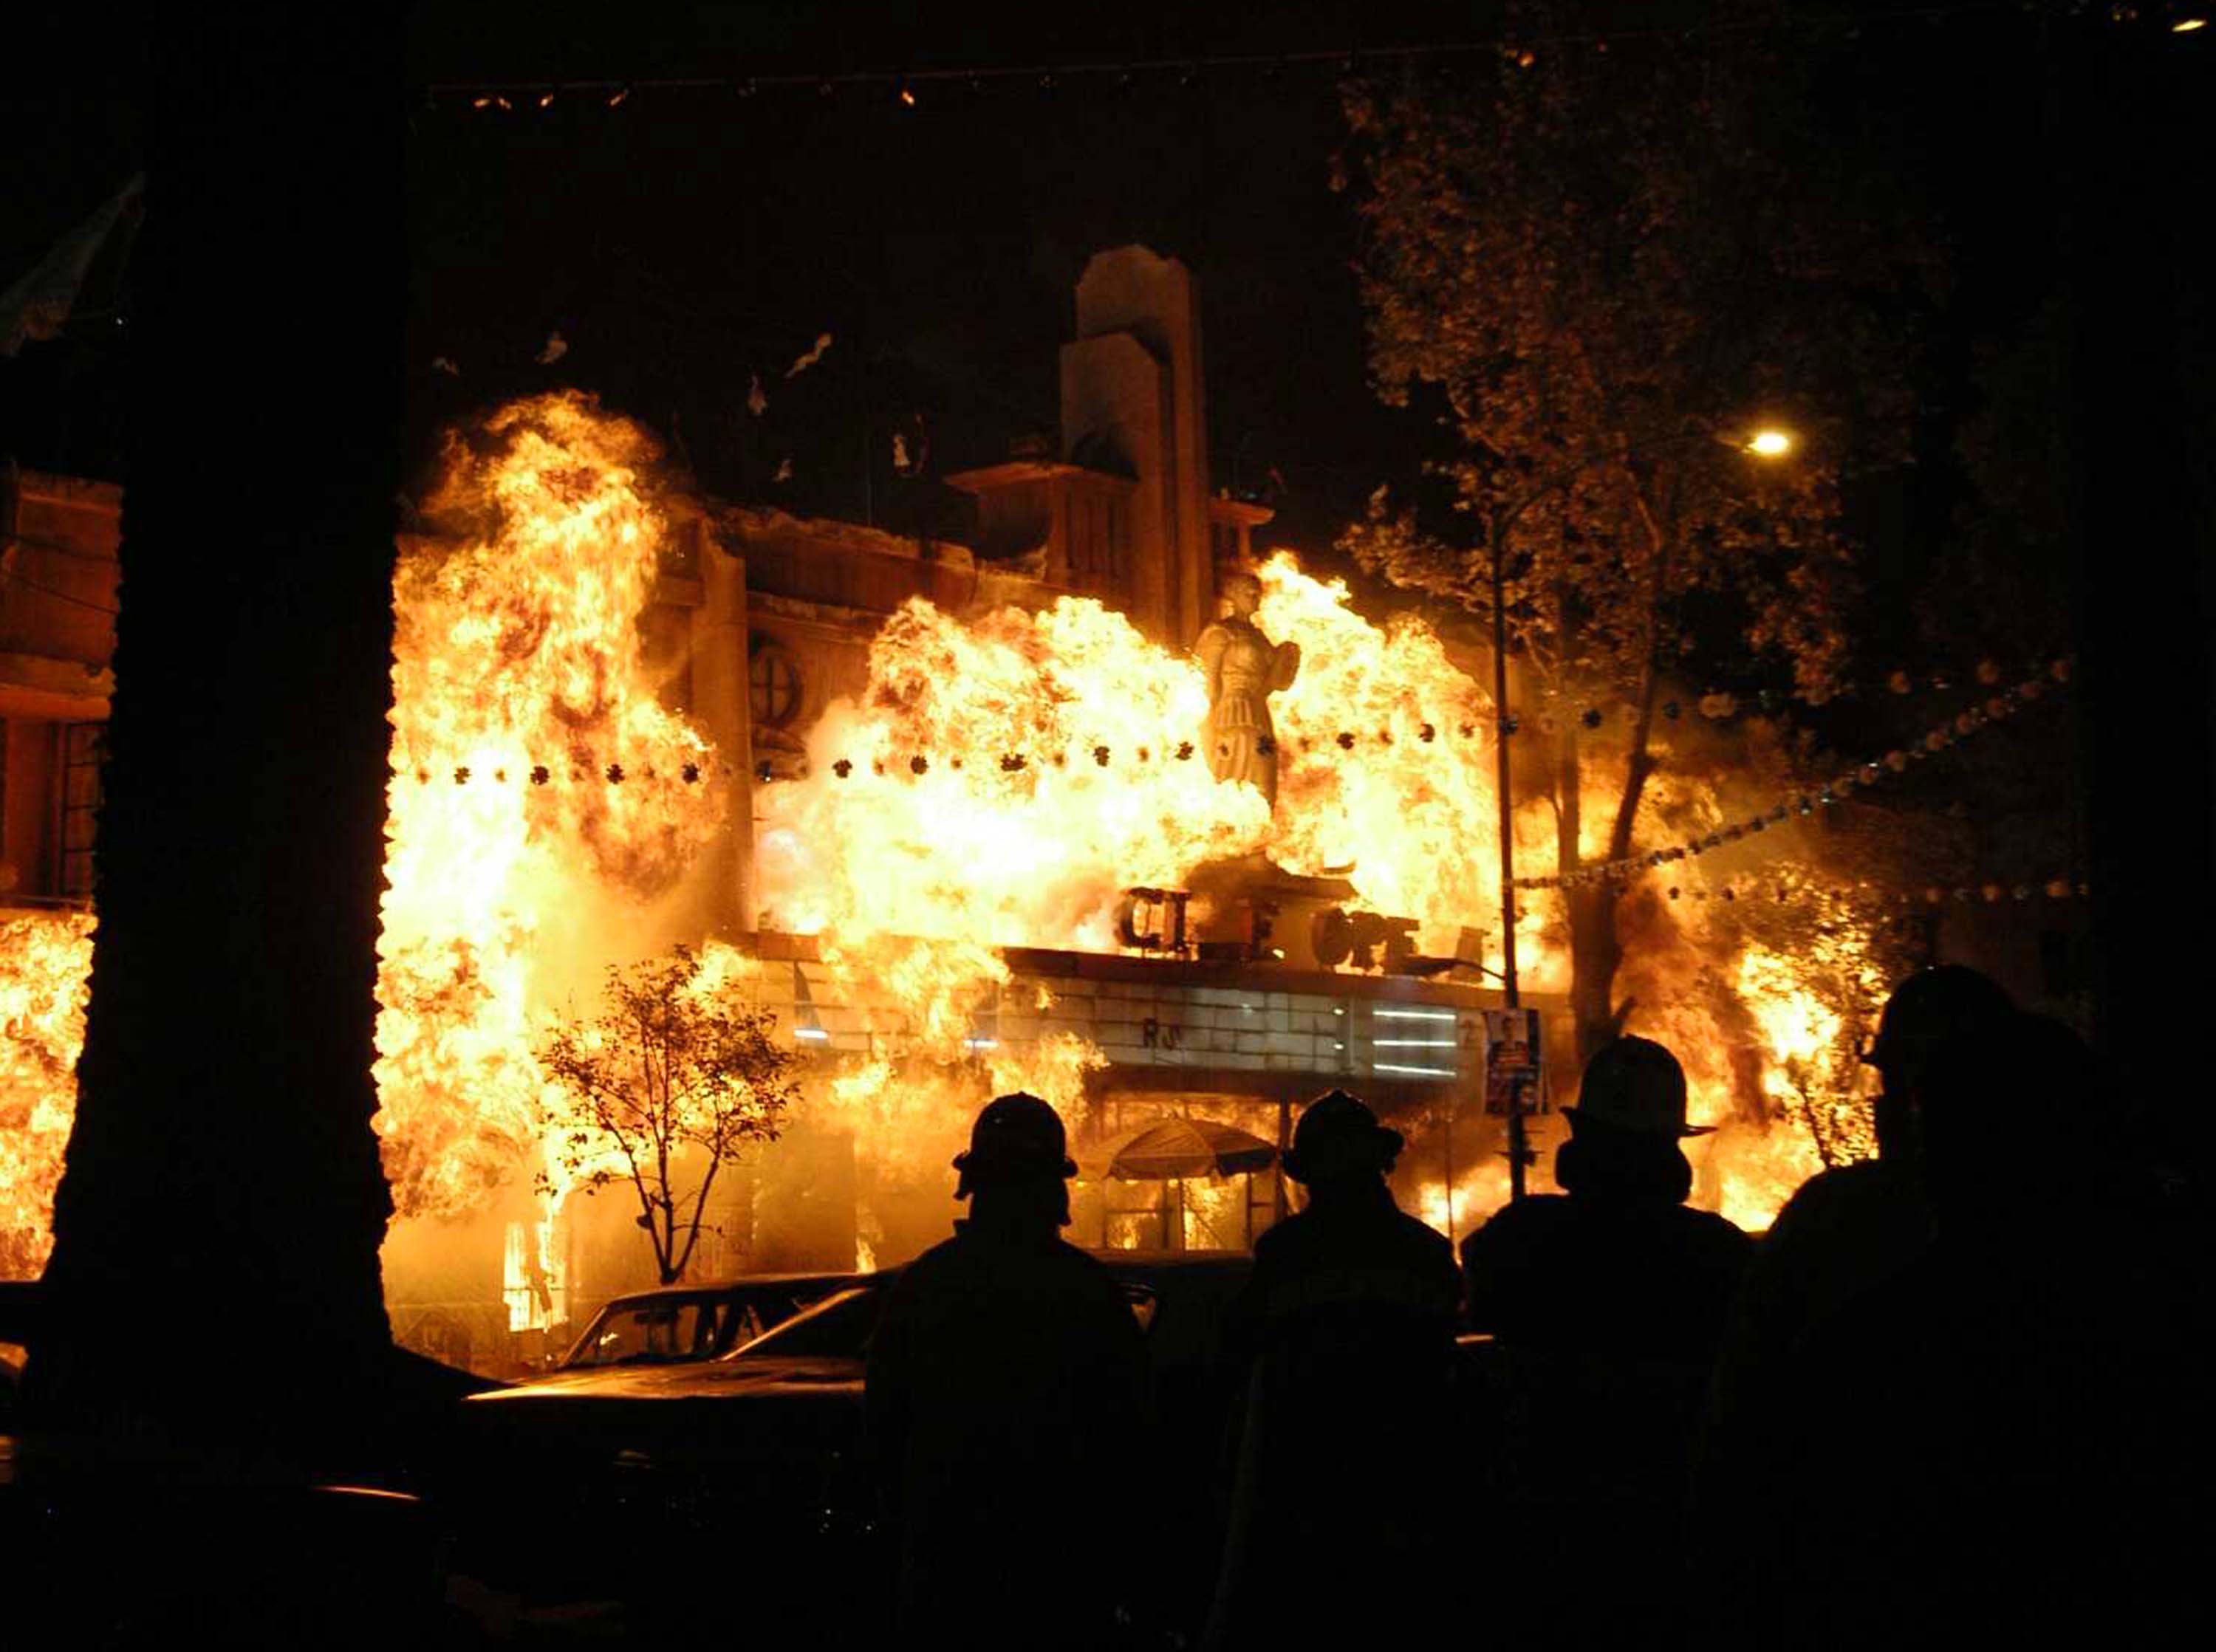 A theatre is set ablaze during filming for the movie "Man on Fire," on May 15, 2003, in Mexico City. | Source: Getty Images